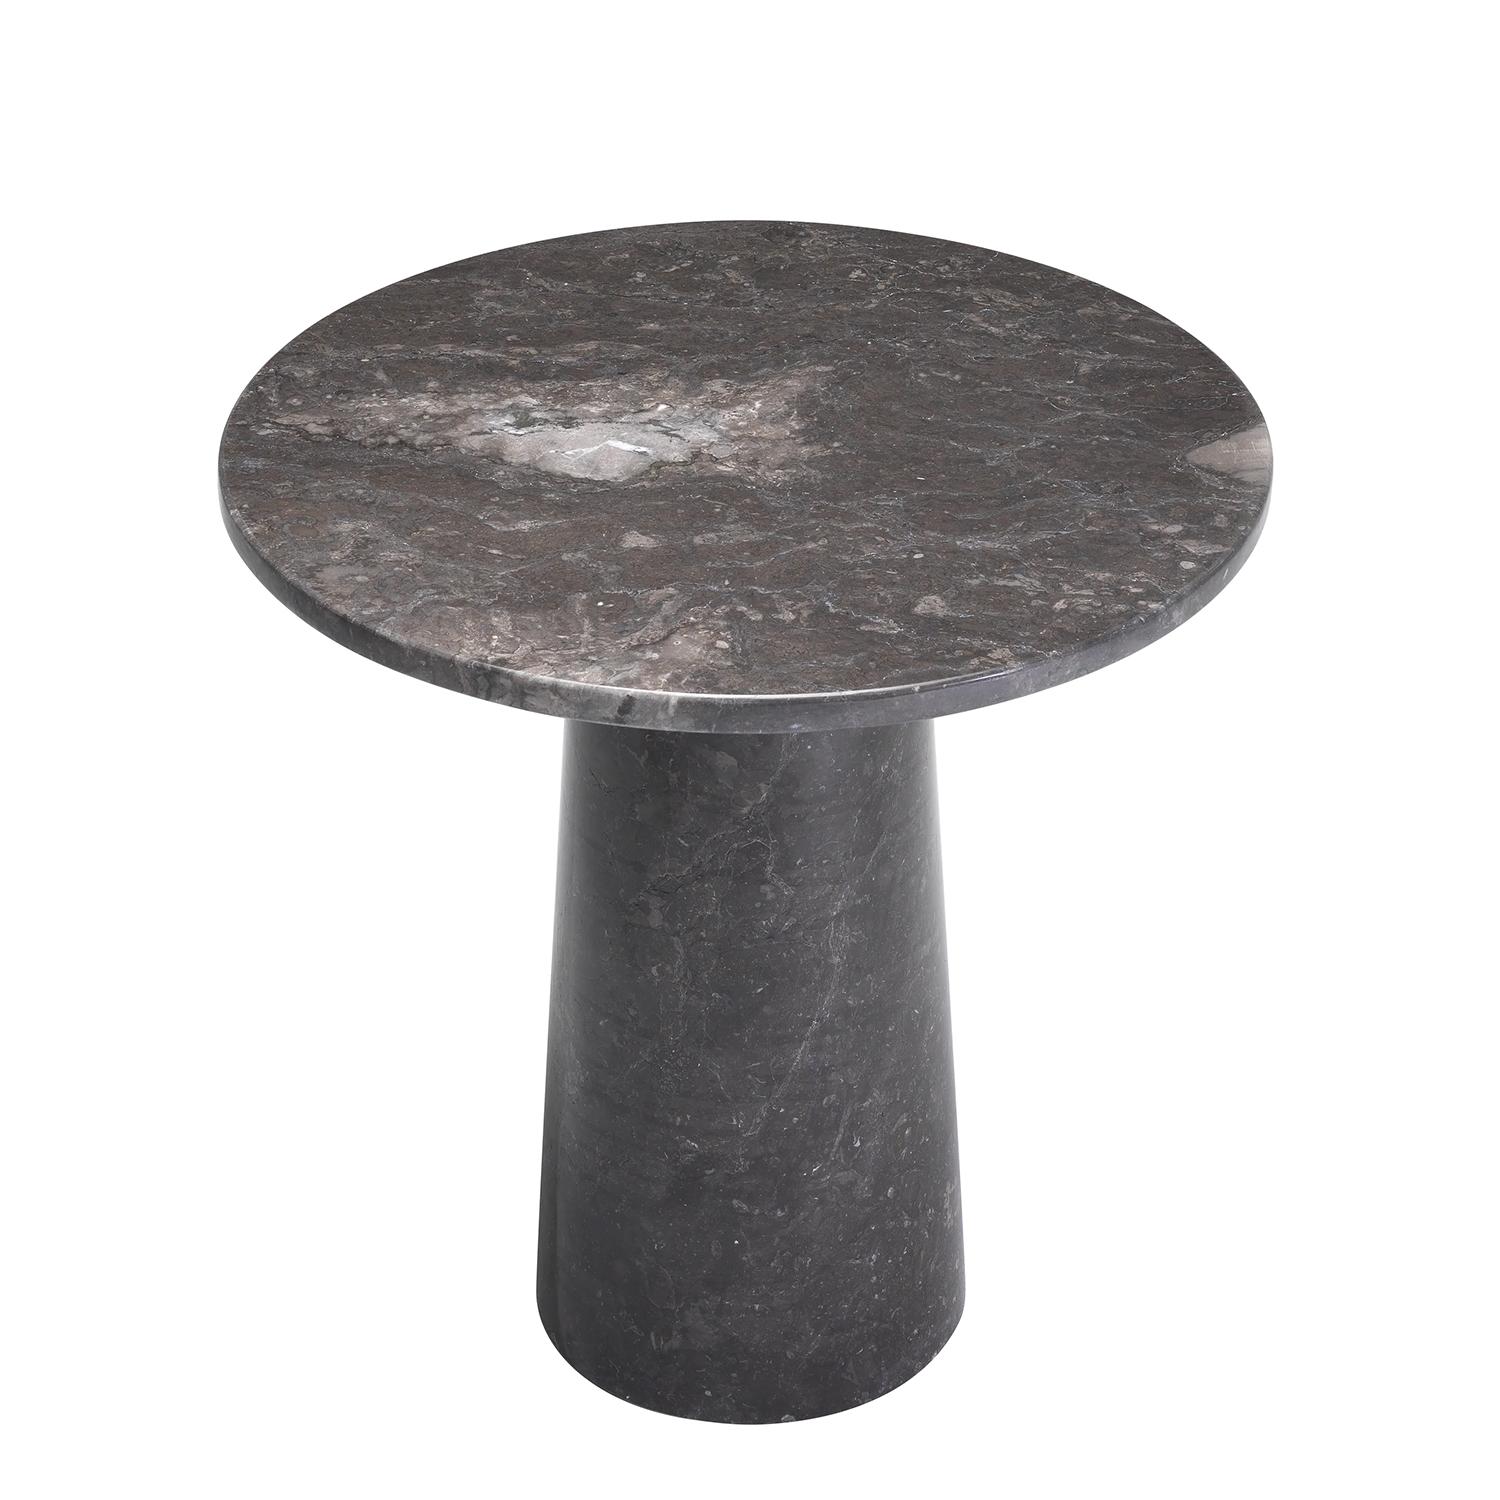 Side Table Romy with base structure in wooden
structure covered with solid polished marble and 
with table top in solid polished marble.
Each piece is a bit different in veining and colors.